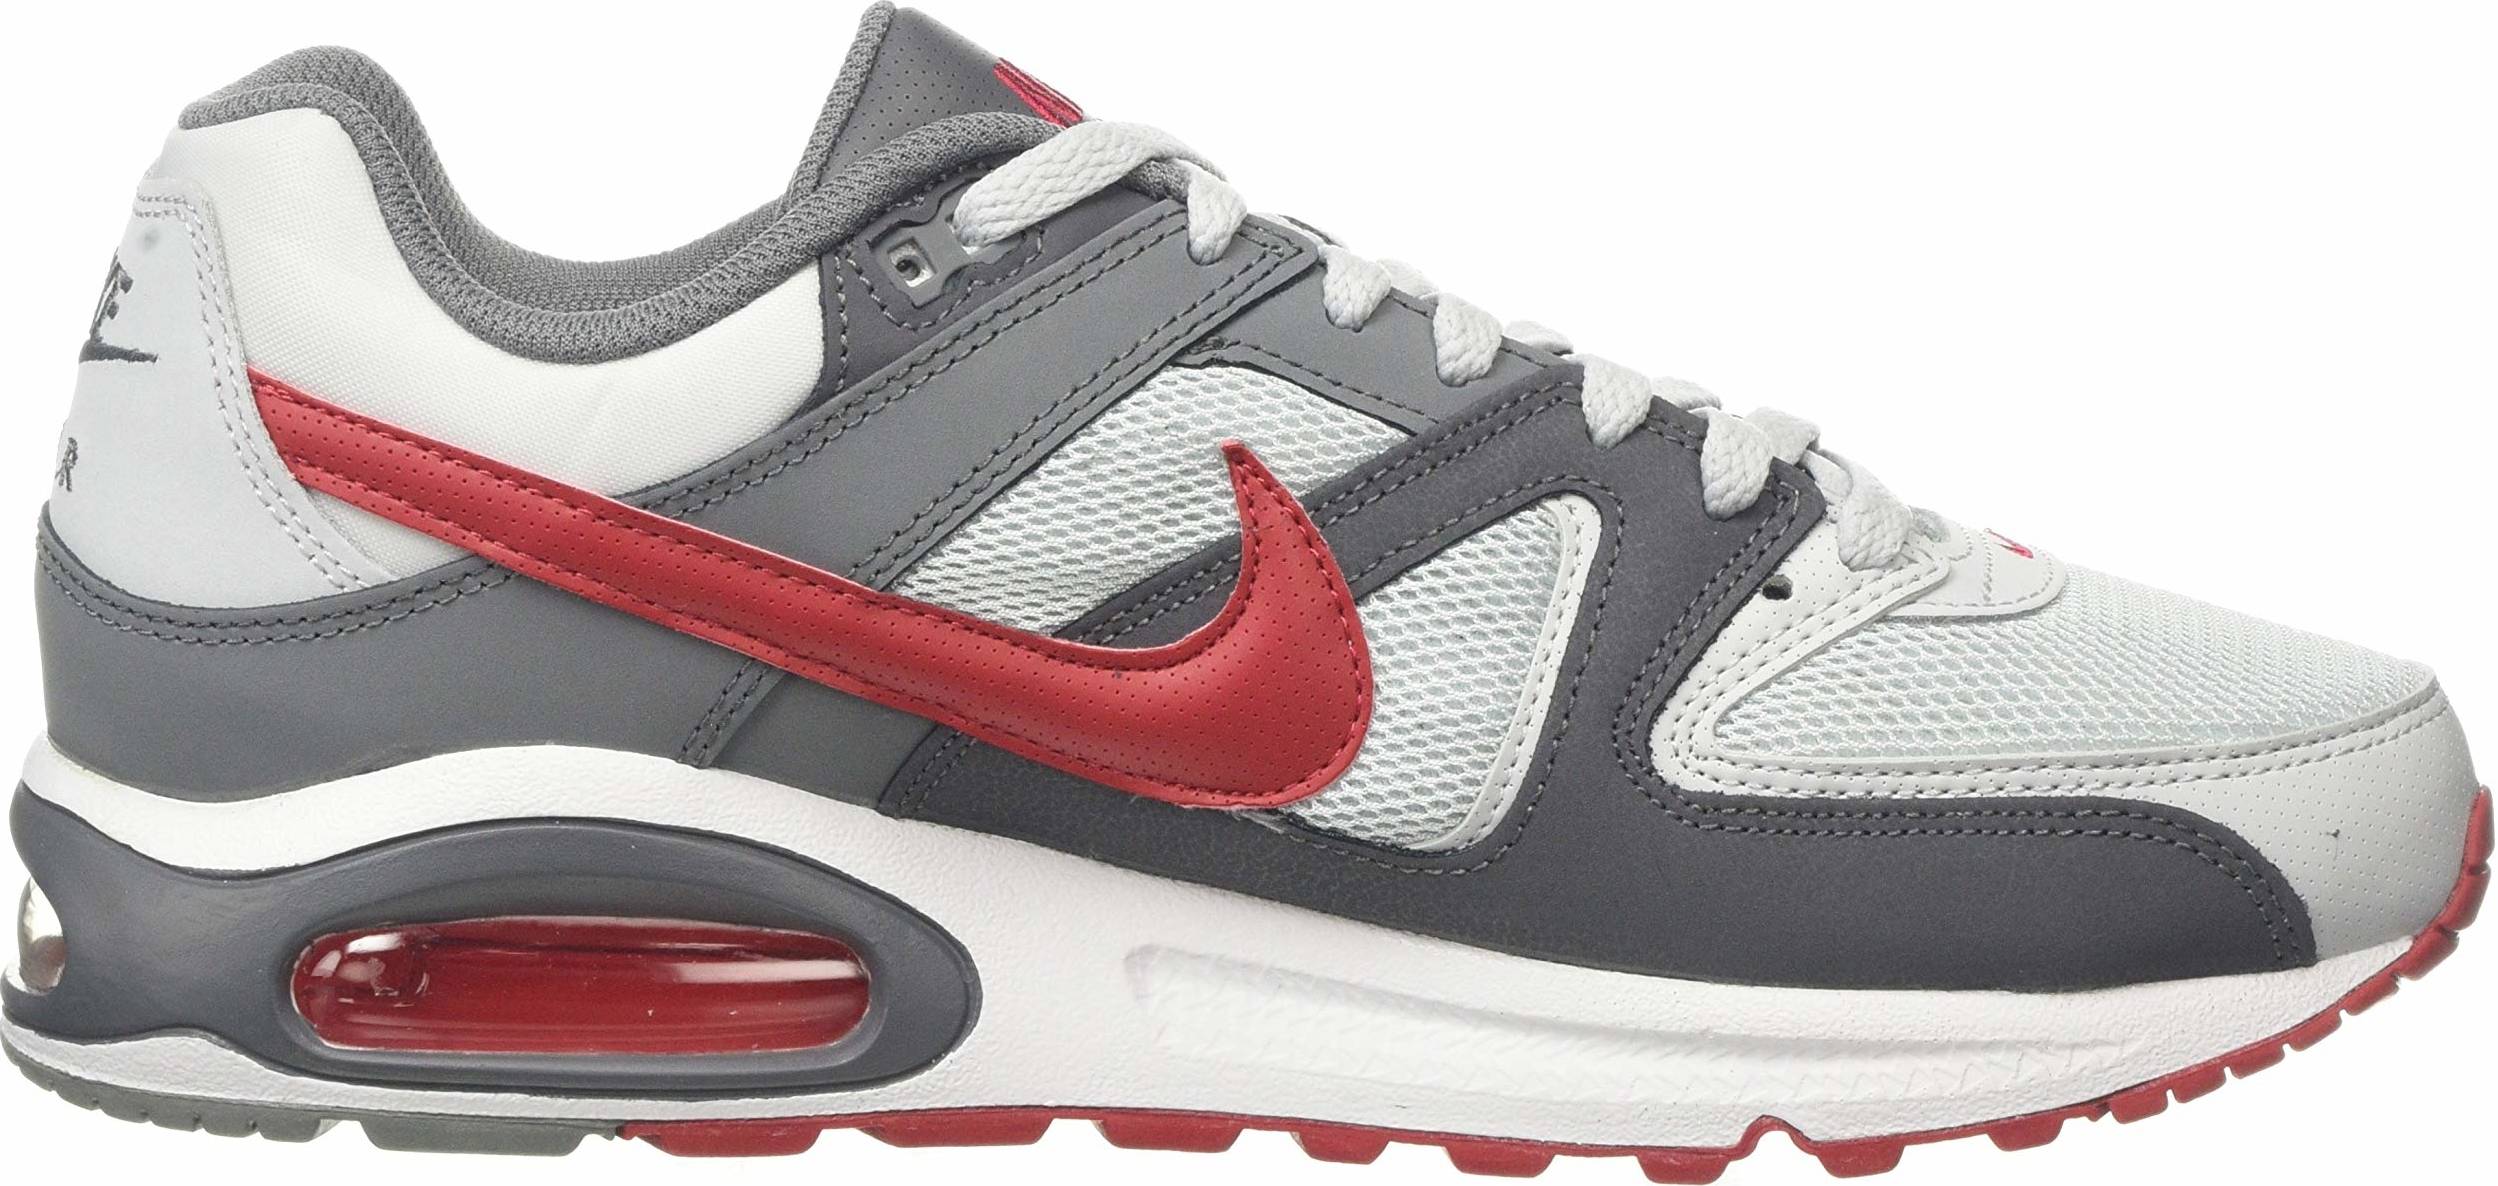 Nike Air Max Command sneakers in 10 (only £94) | RunRepeat